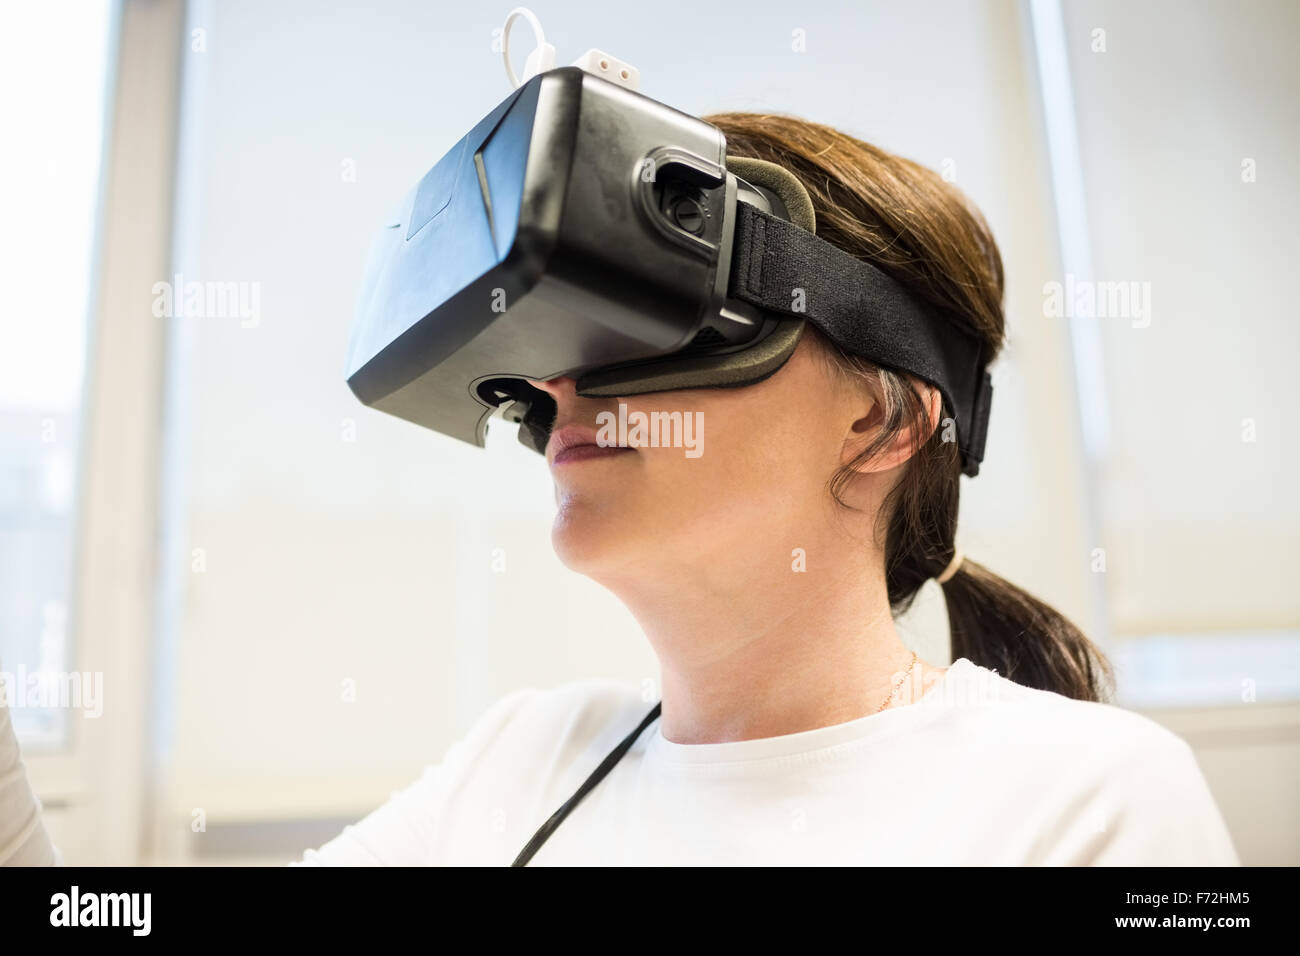 Oculus Rift Headset High Resolution Stock Photography and Images - Alamy